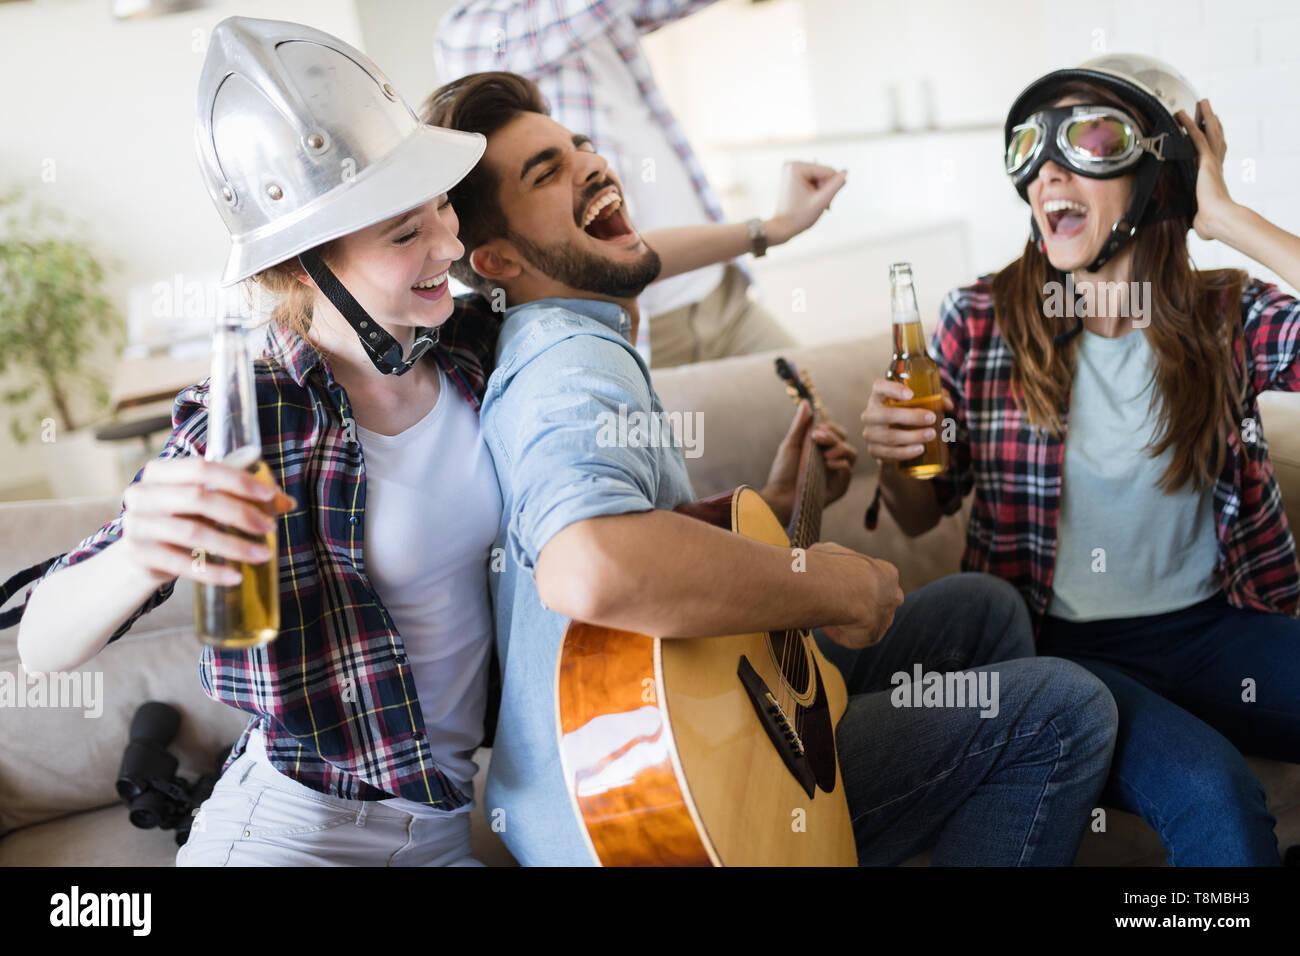 Group of friends playing guitar and partying at home Stock Photo